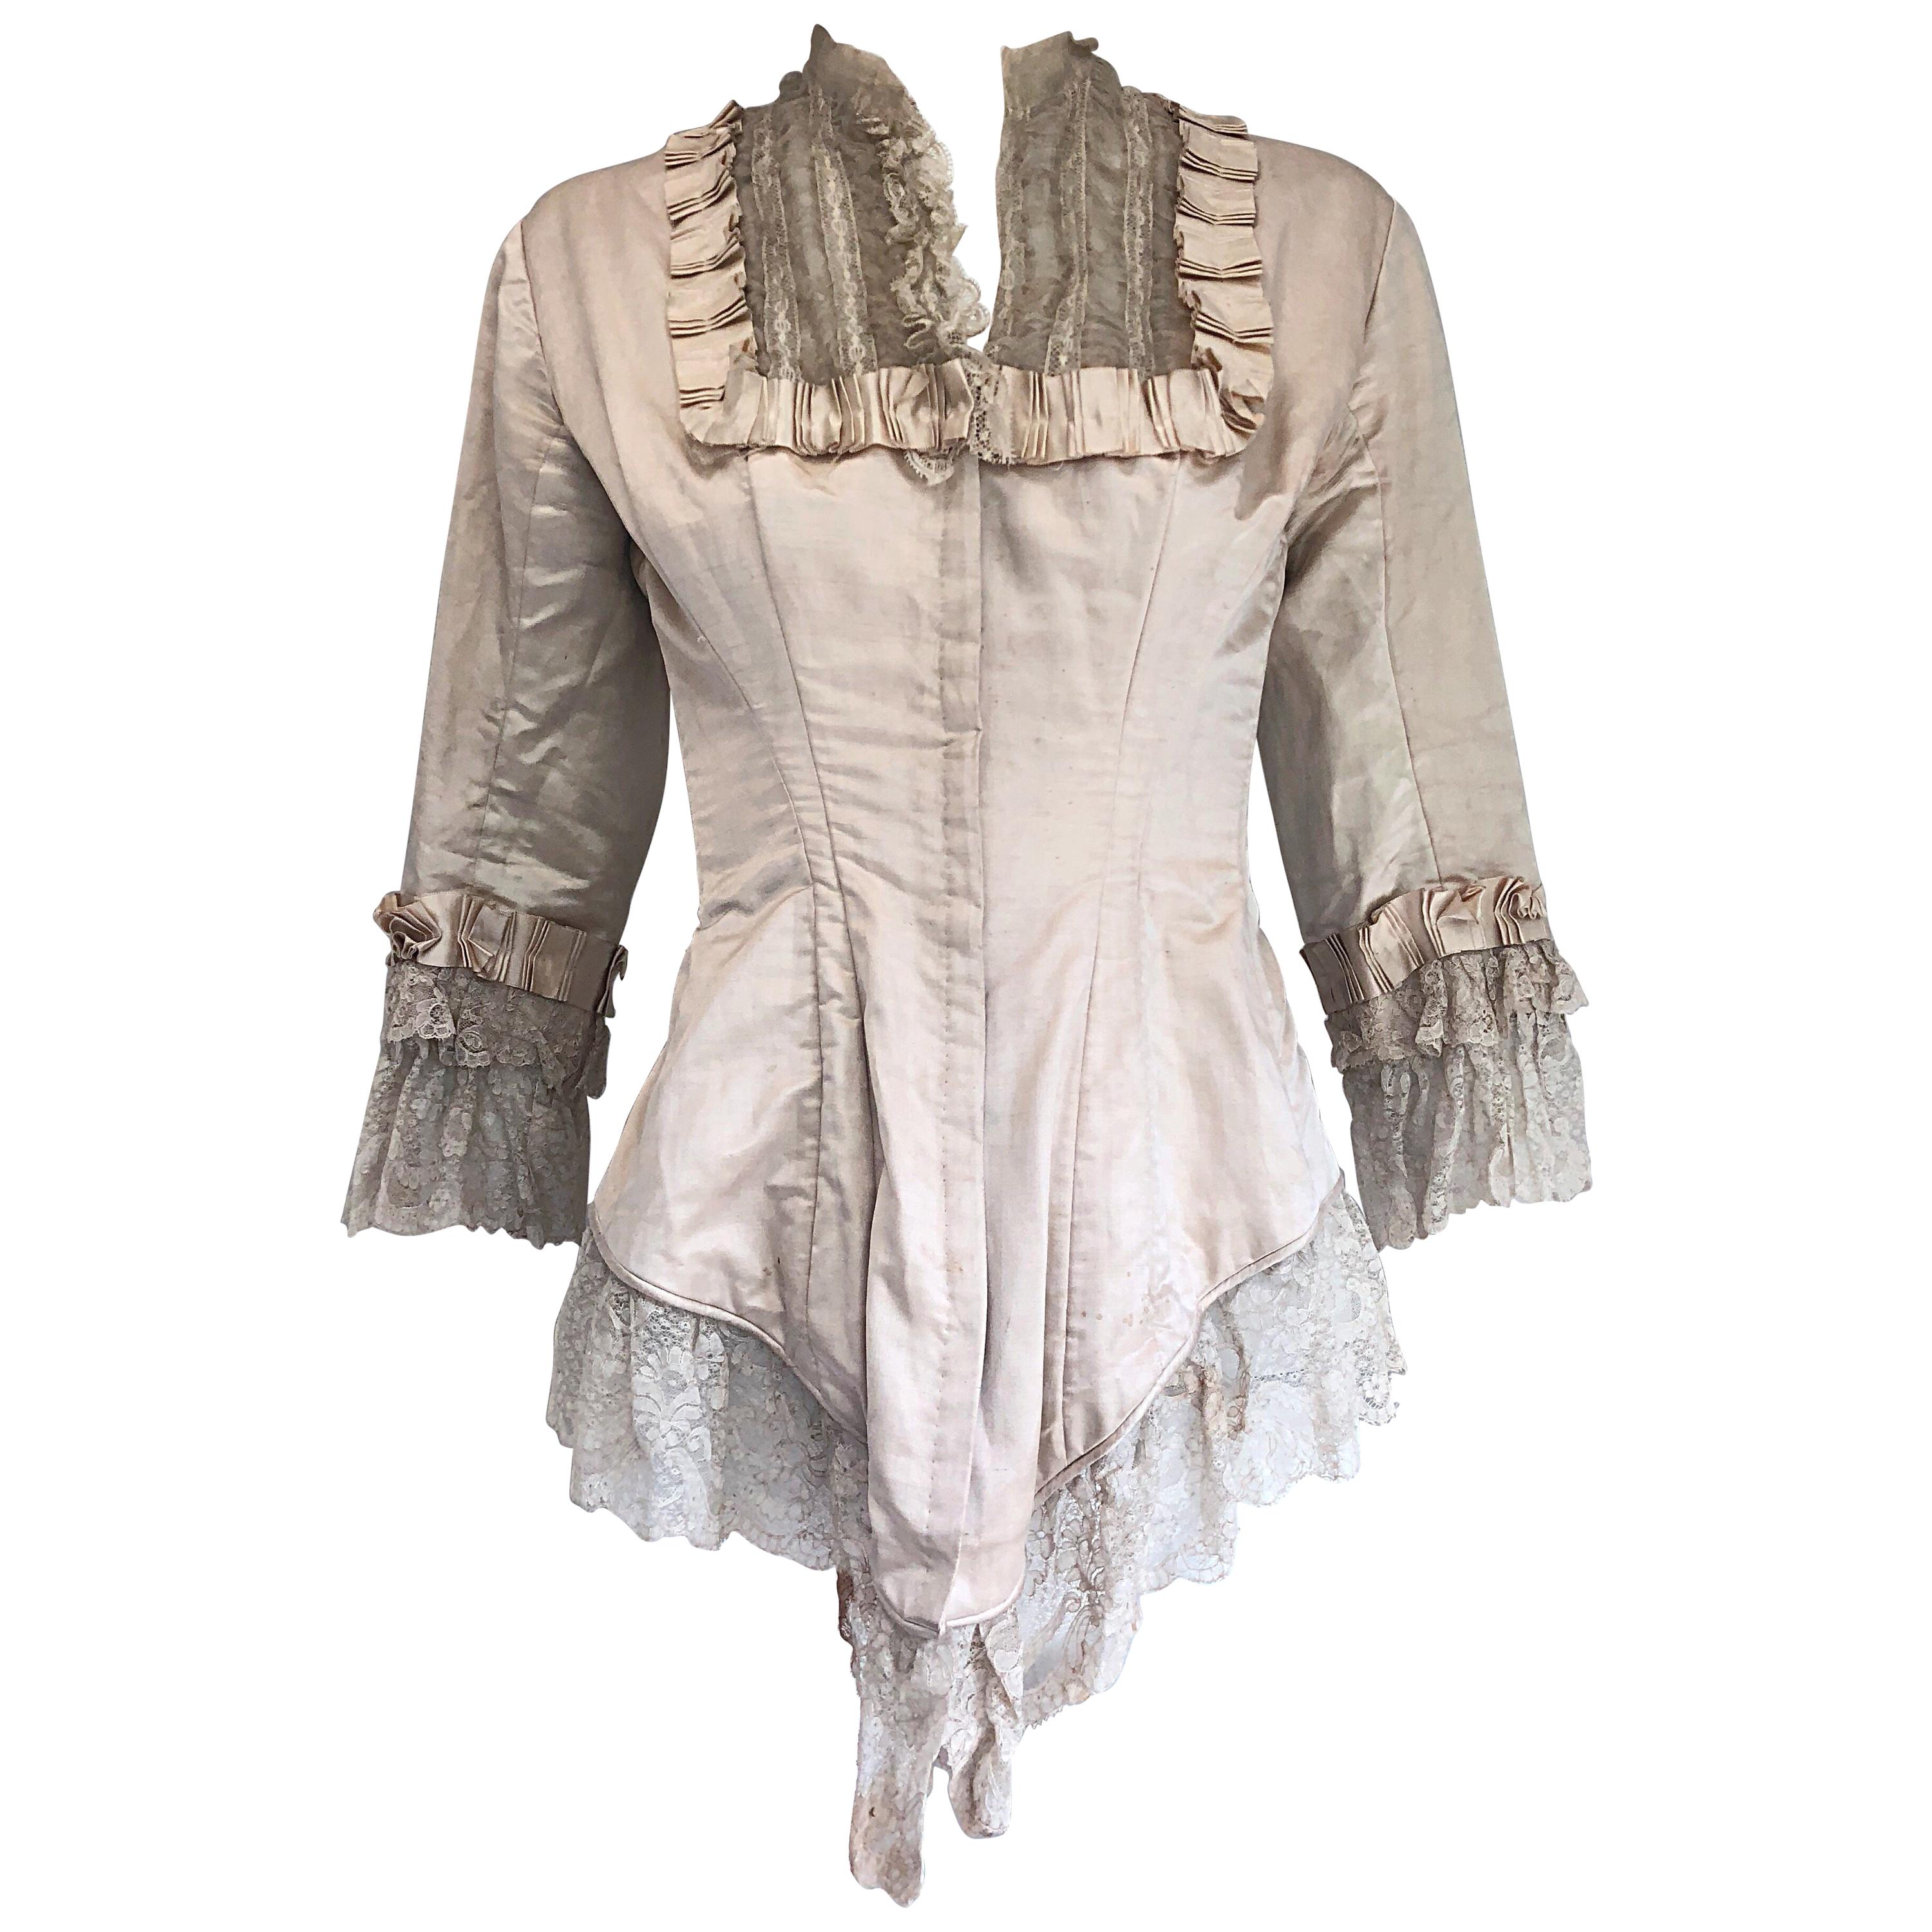 1880s Incredible Authentic Victorian Ivory Silk Lace Corset 1800s Couture Blouse